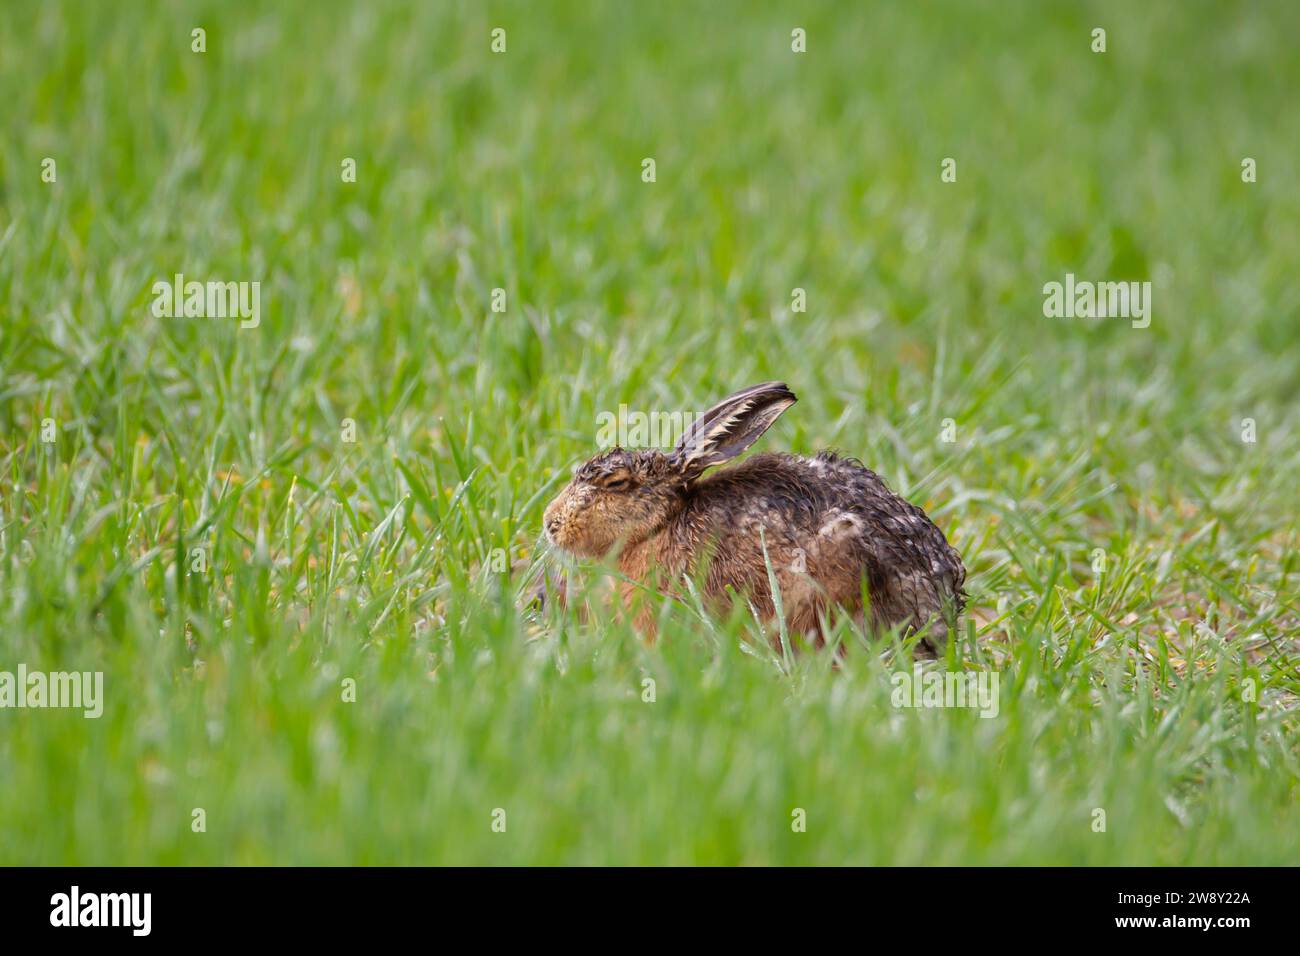 European brown hare (Lepus europaeus) adult animal soaking wet after a rain storm in a farmland cereal crop, Norfolk, England, United Kingdom Stock Photo